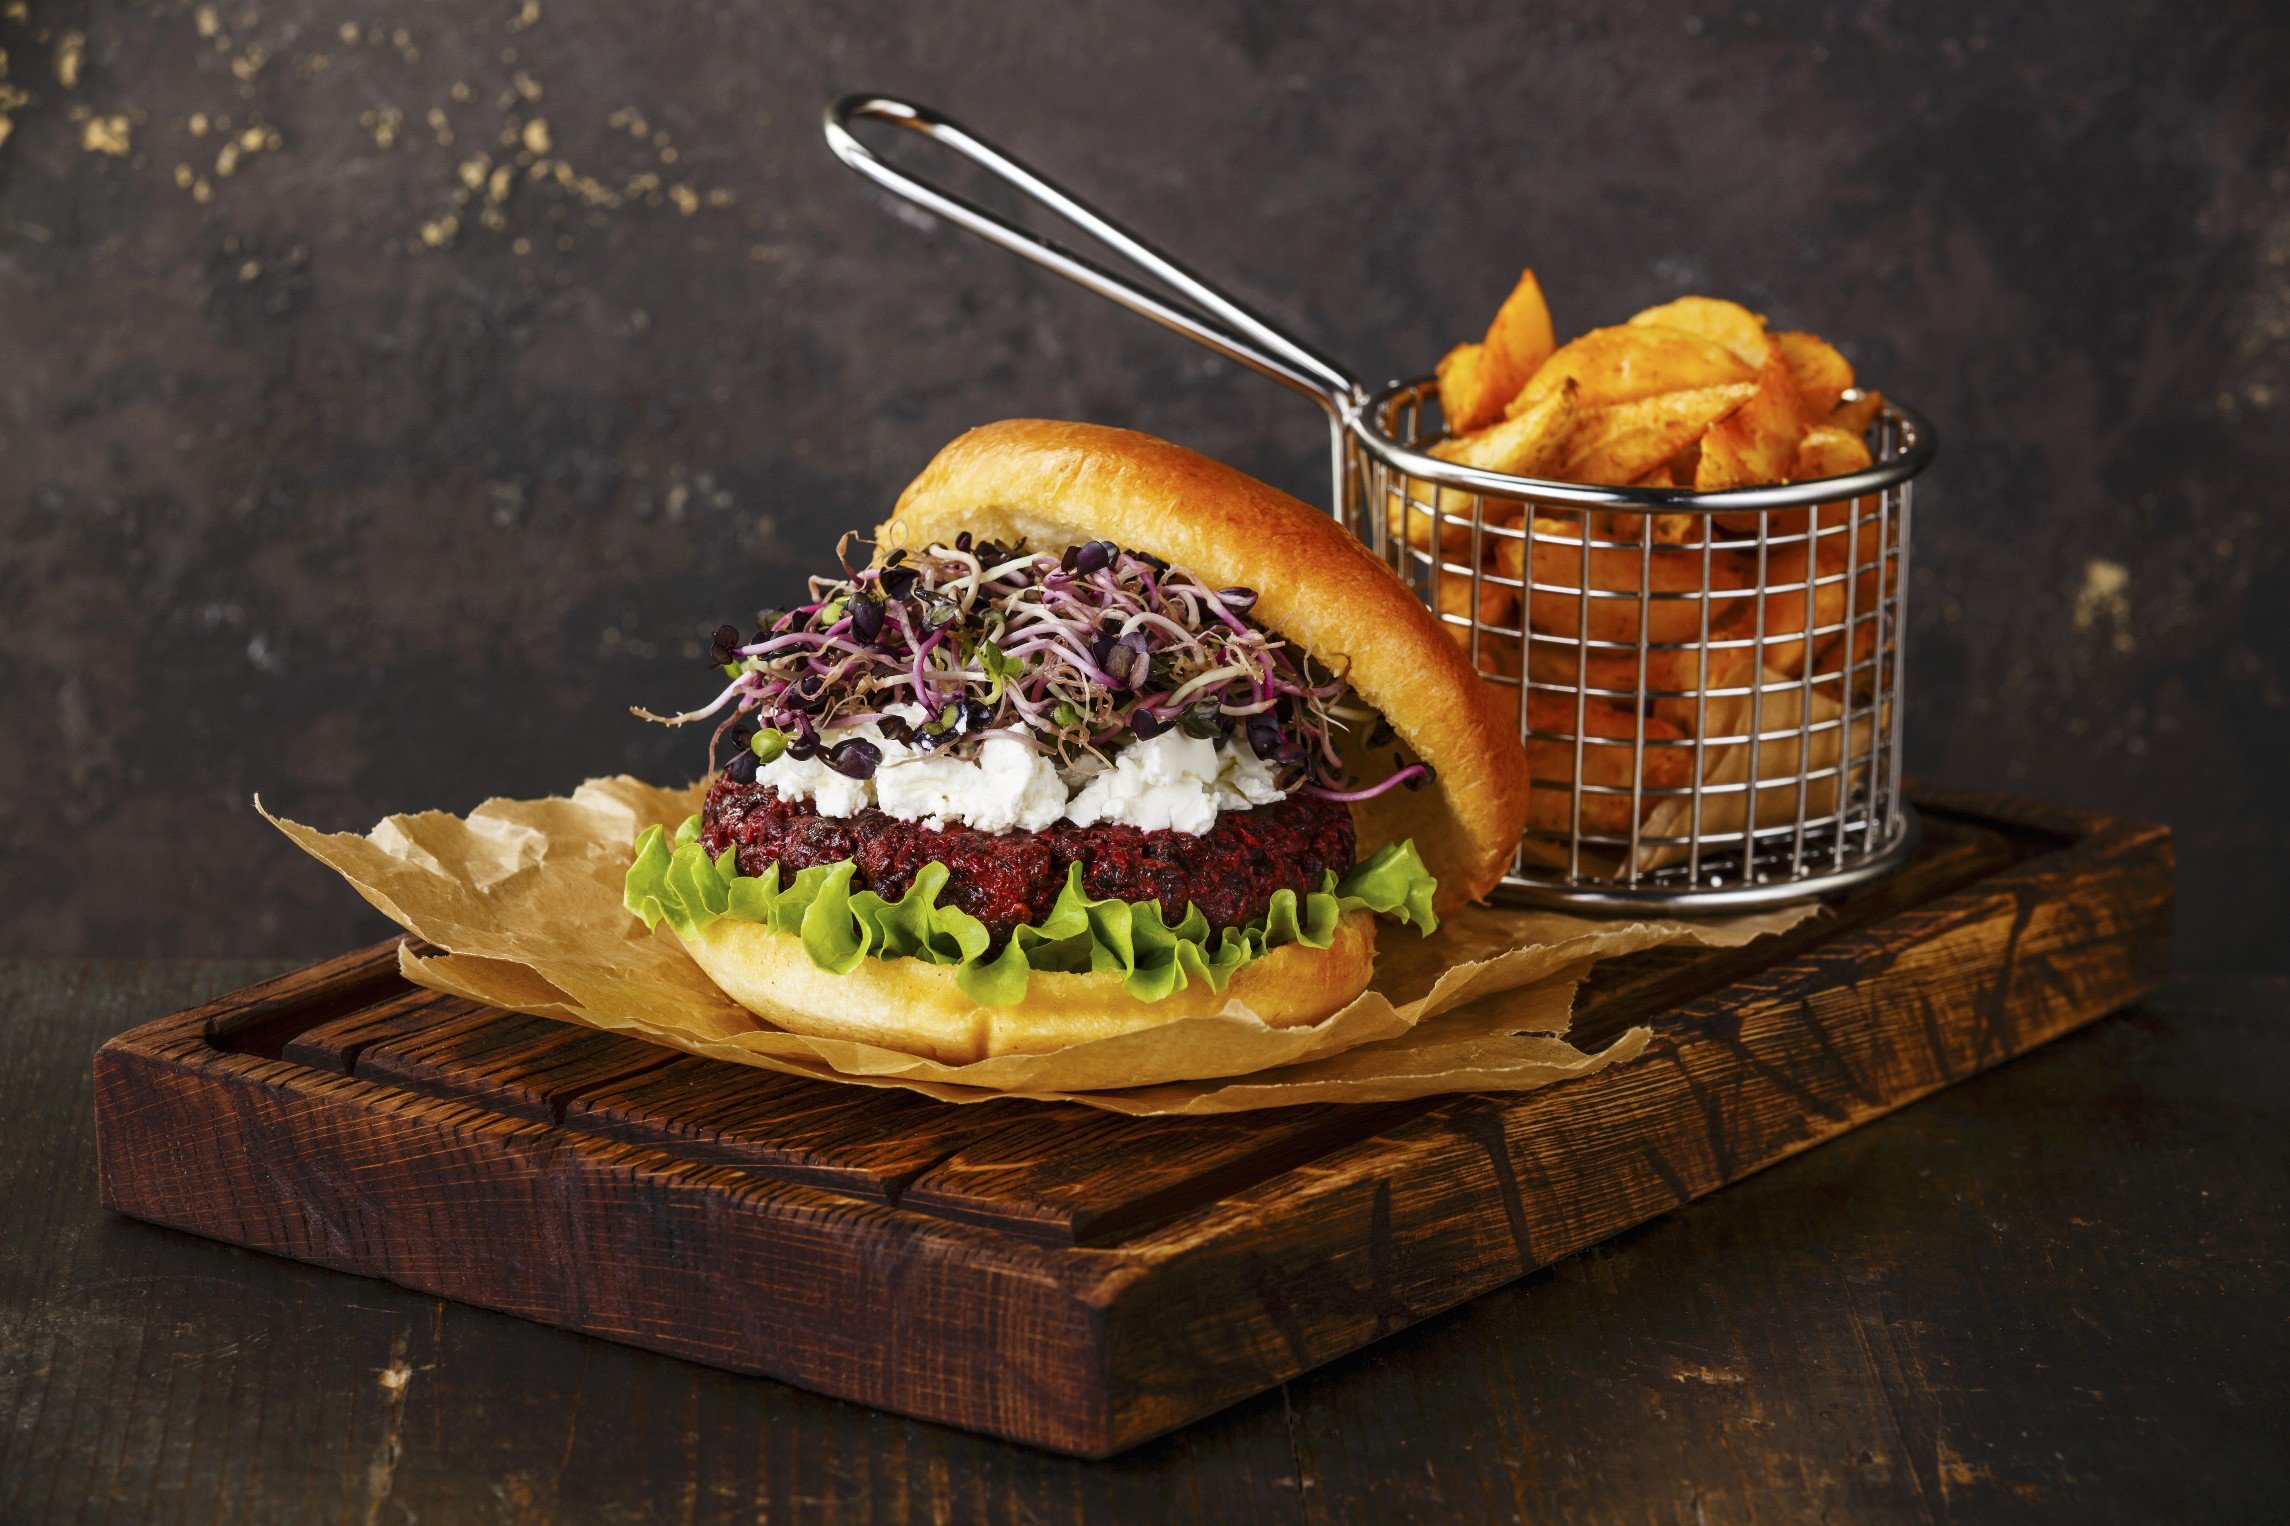 StockFood_12292189_L_Beet_burger_with_soft_cheese_radish_sprouts_and_potato_wedges_on_dark_background.jpg